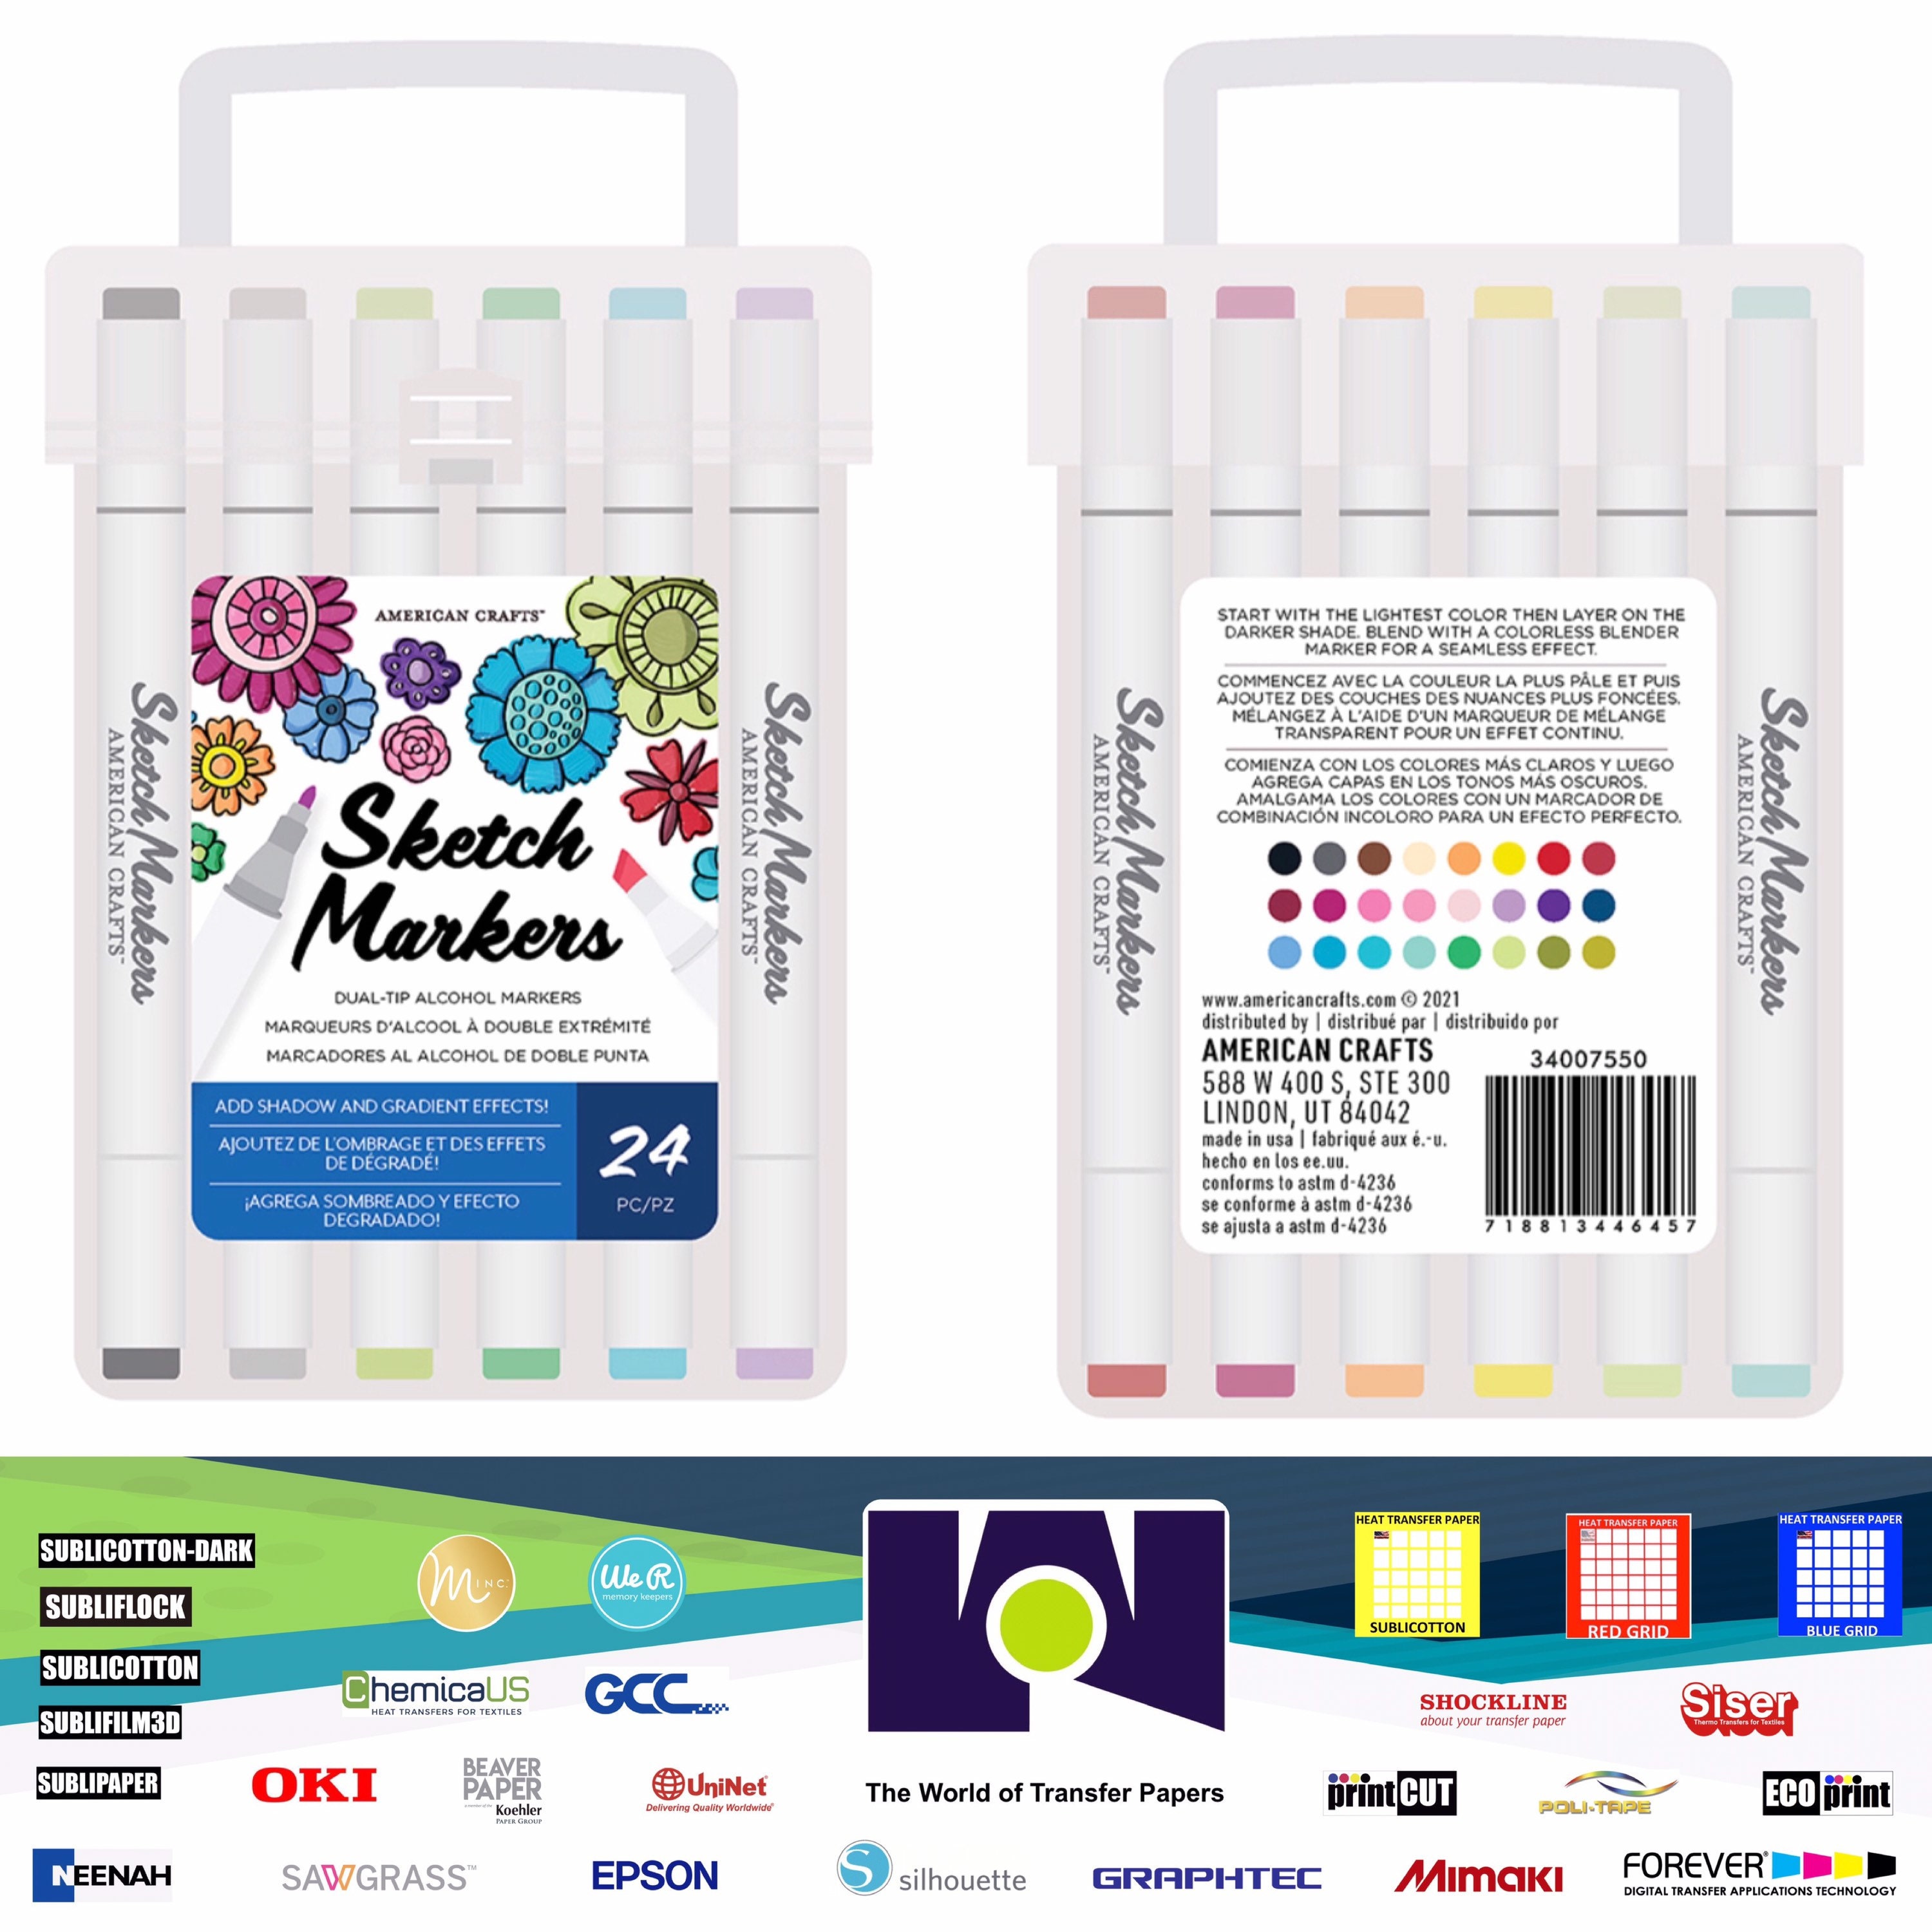 American Crafts Dual-Tip 48 Sketch Markers and 3 Colorless Blenders